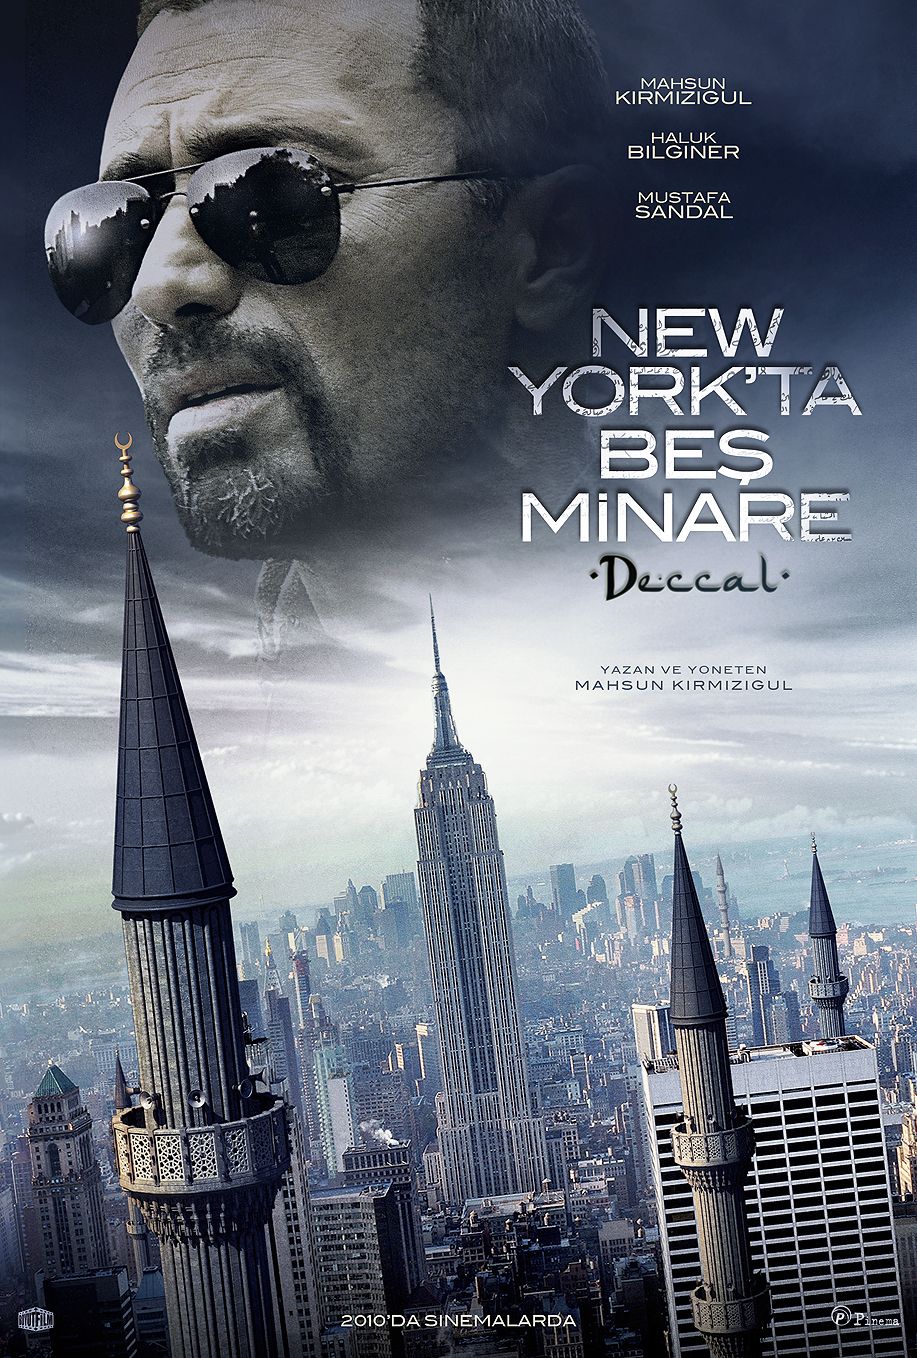 Extra Large Movie Poster Image for New York'ta Be? Minare (#5 of 6)